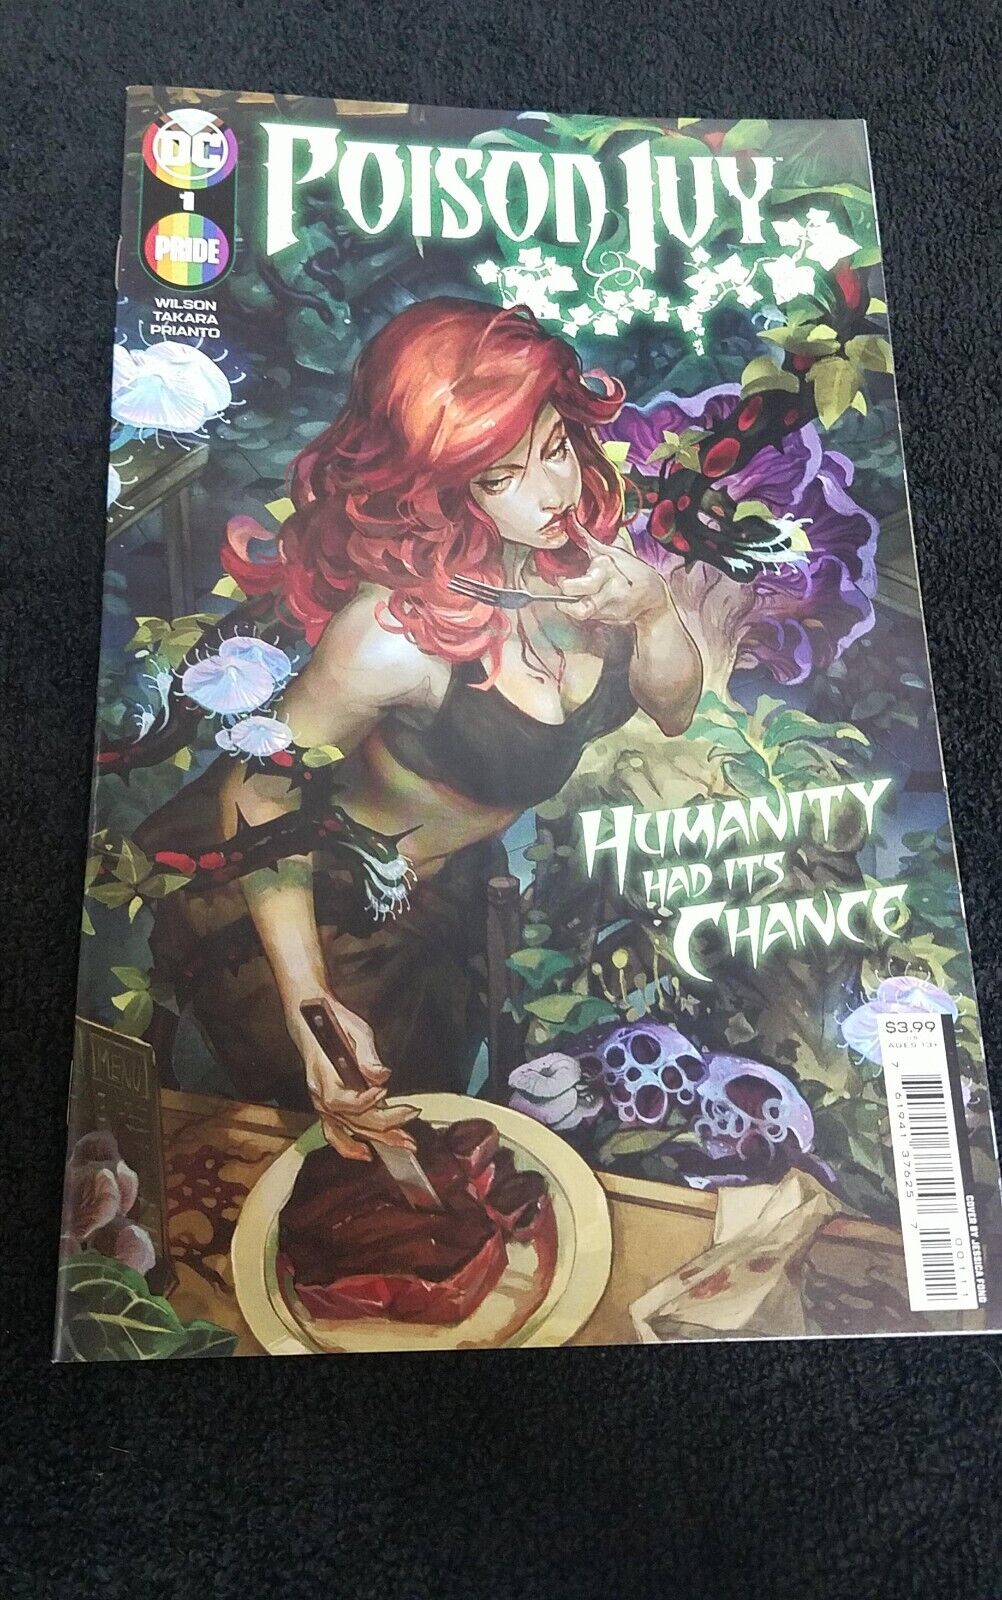 2022 DC COMICS POISON IVY NM UNREAD MULTIPLE ISSUES COVERS CHOOSE YOUR OWN